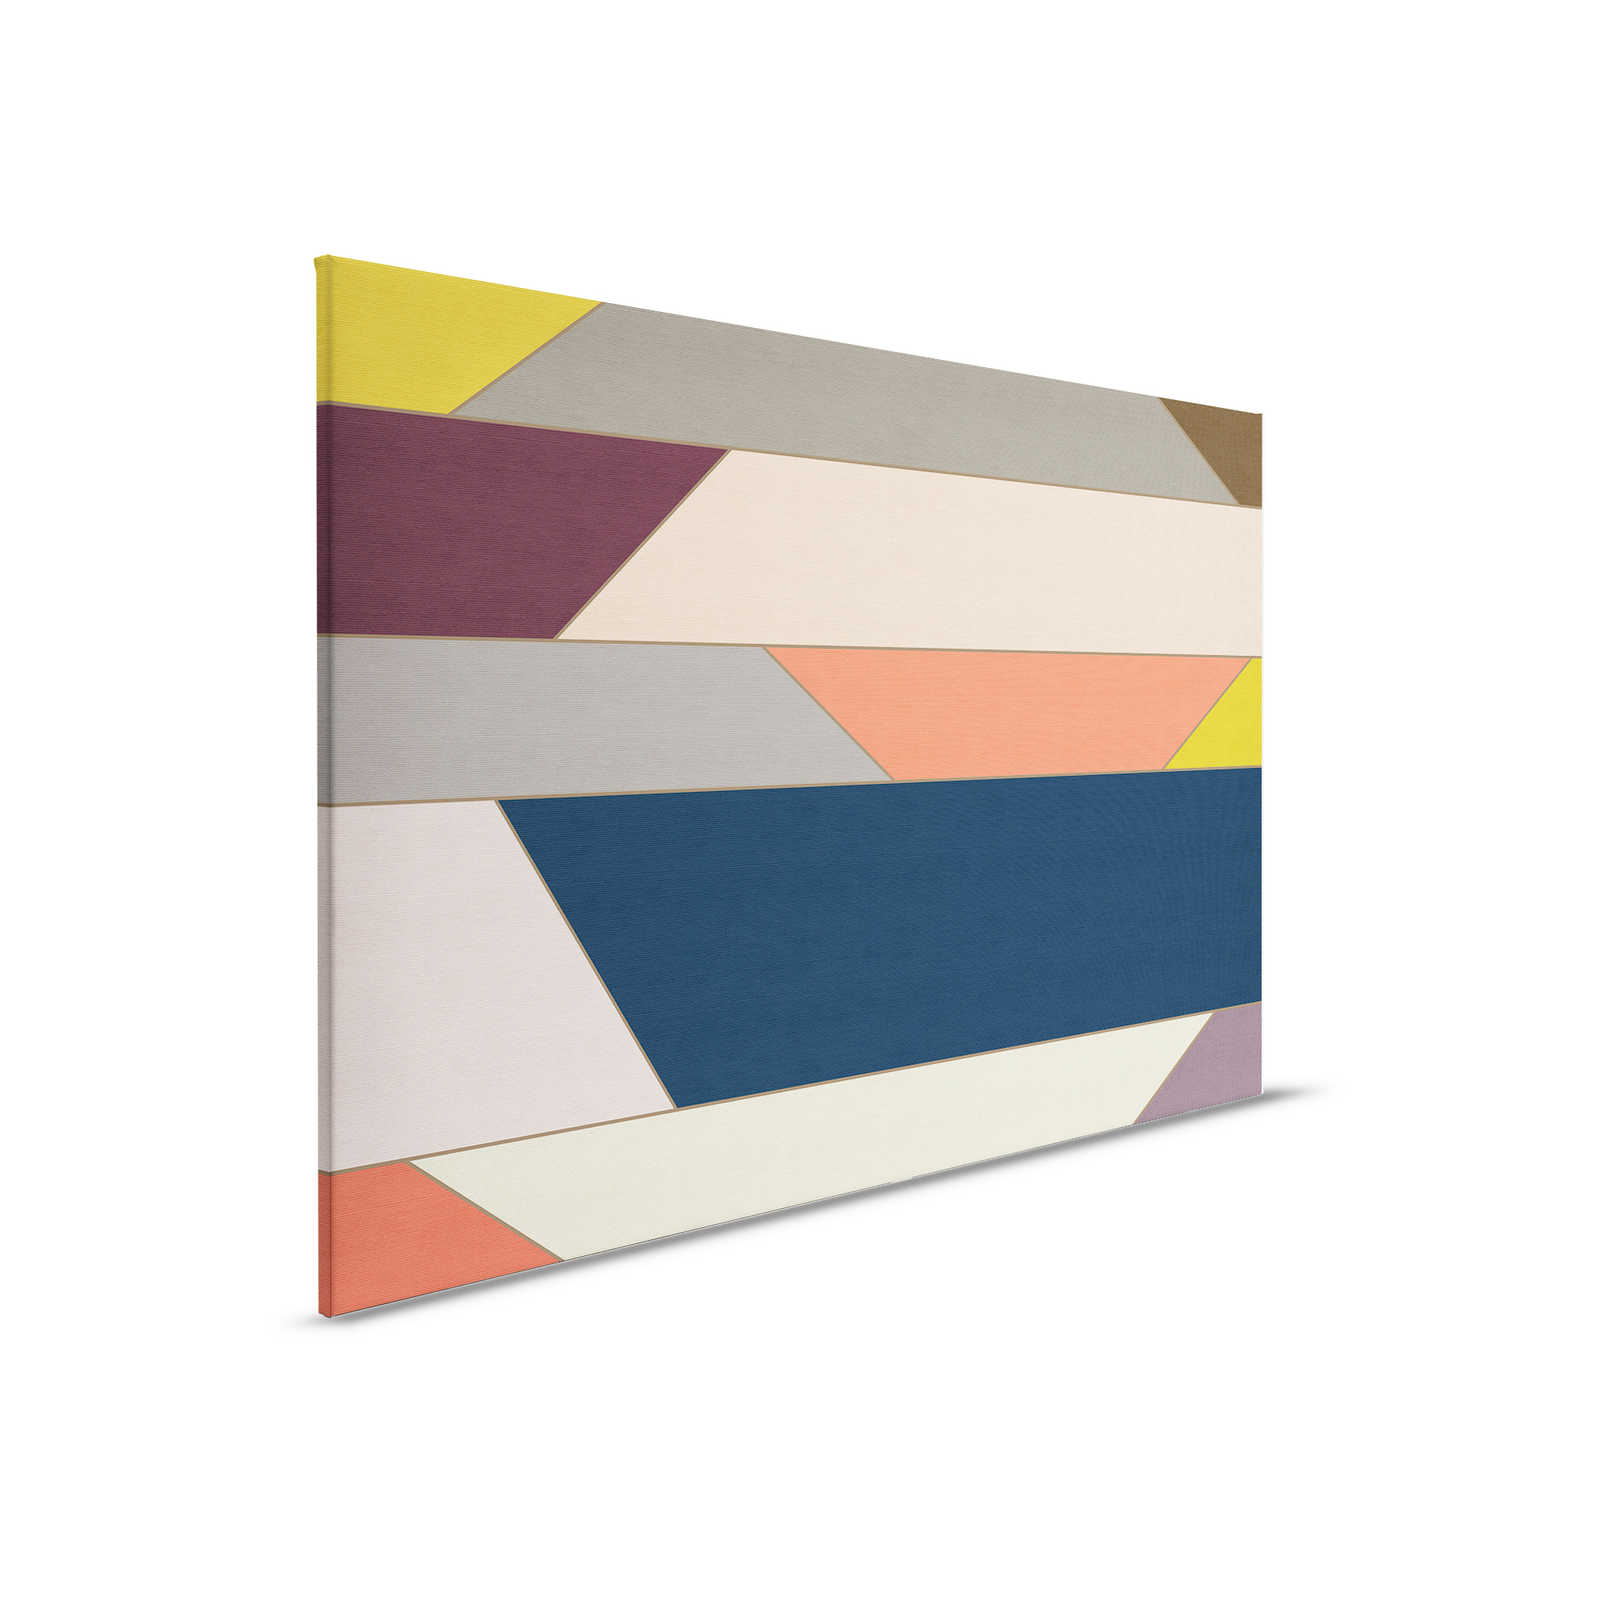         Geometry 1 - Canvas painting with colourful horizontal stripe pattern- ribbed structure - 0.90 m x 0.60 m
    